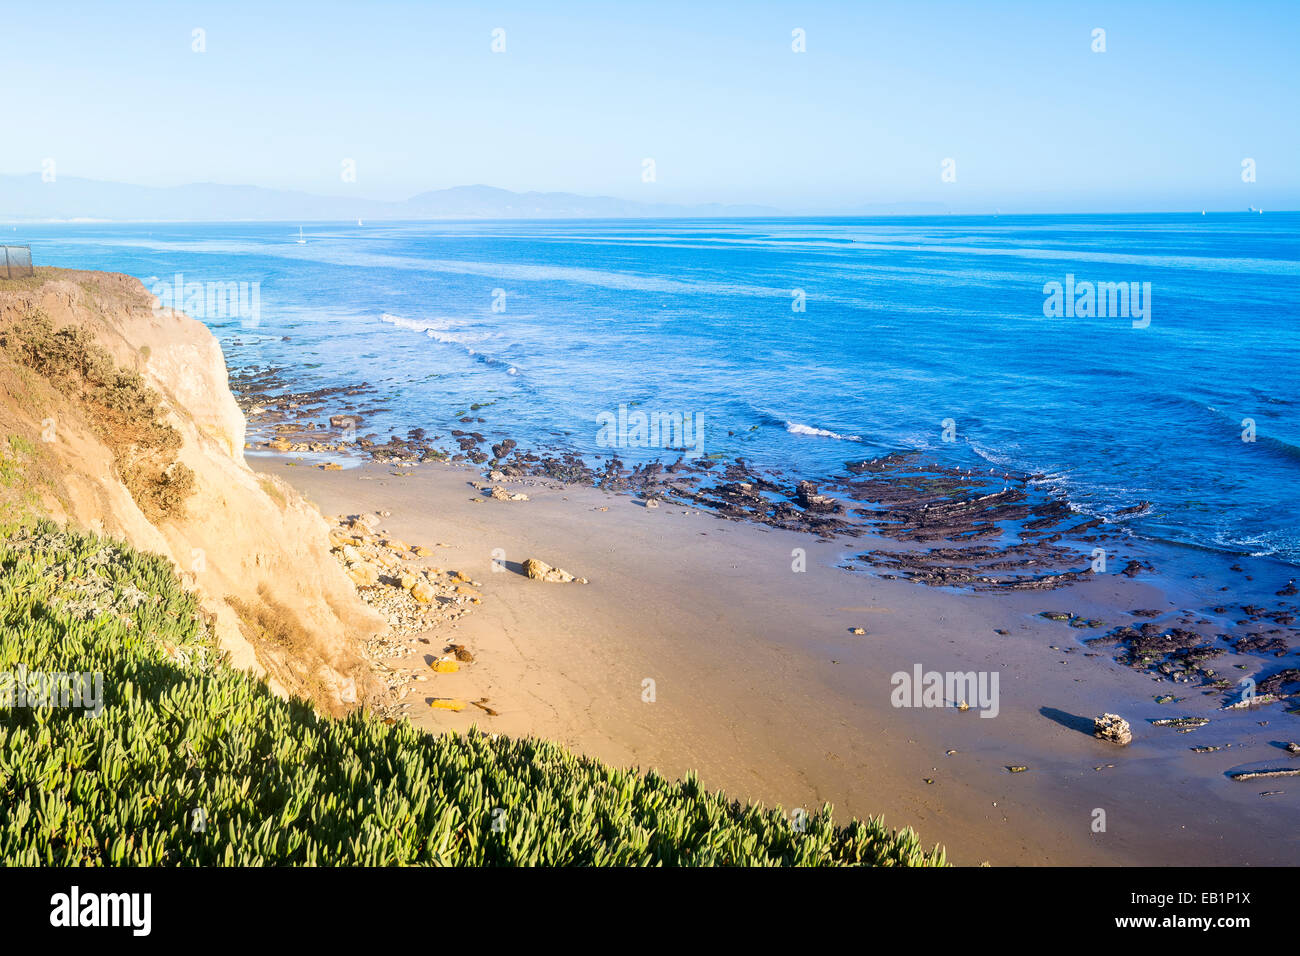 As the sun sets it lights up the side of a cliff in a rich, yellow tone as viewed from the edge of a cliff. Stock Photo